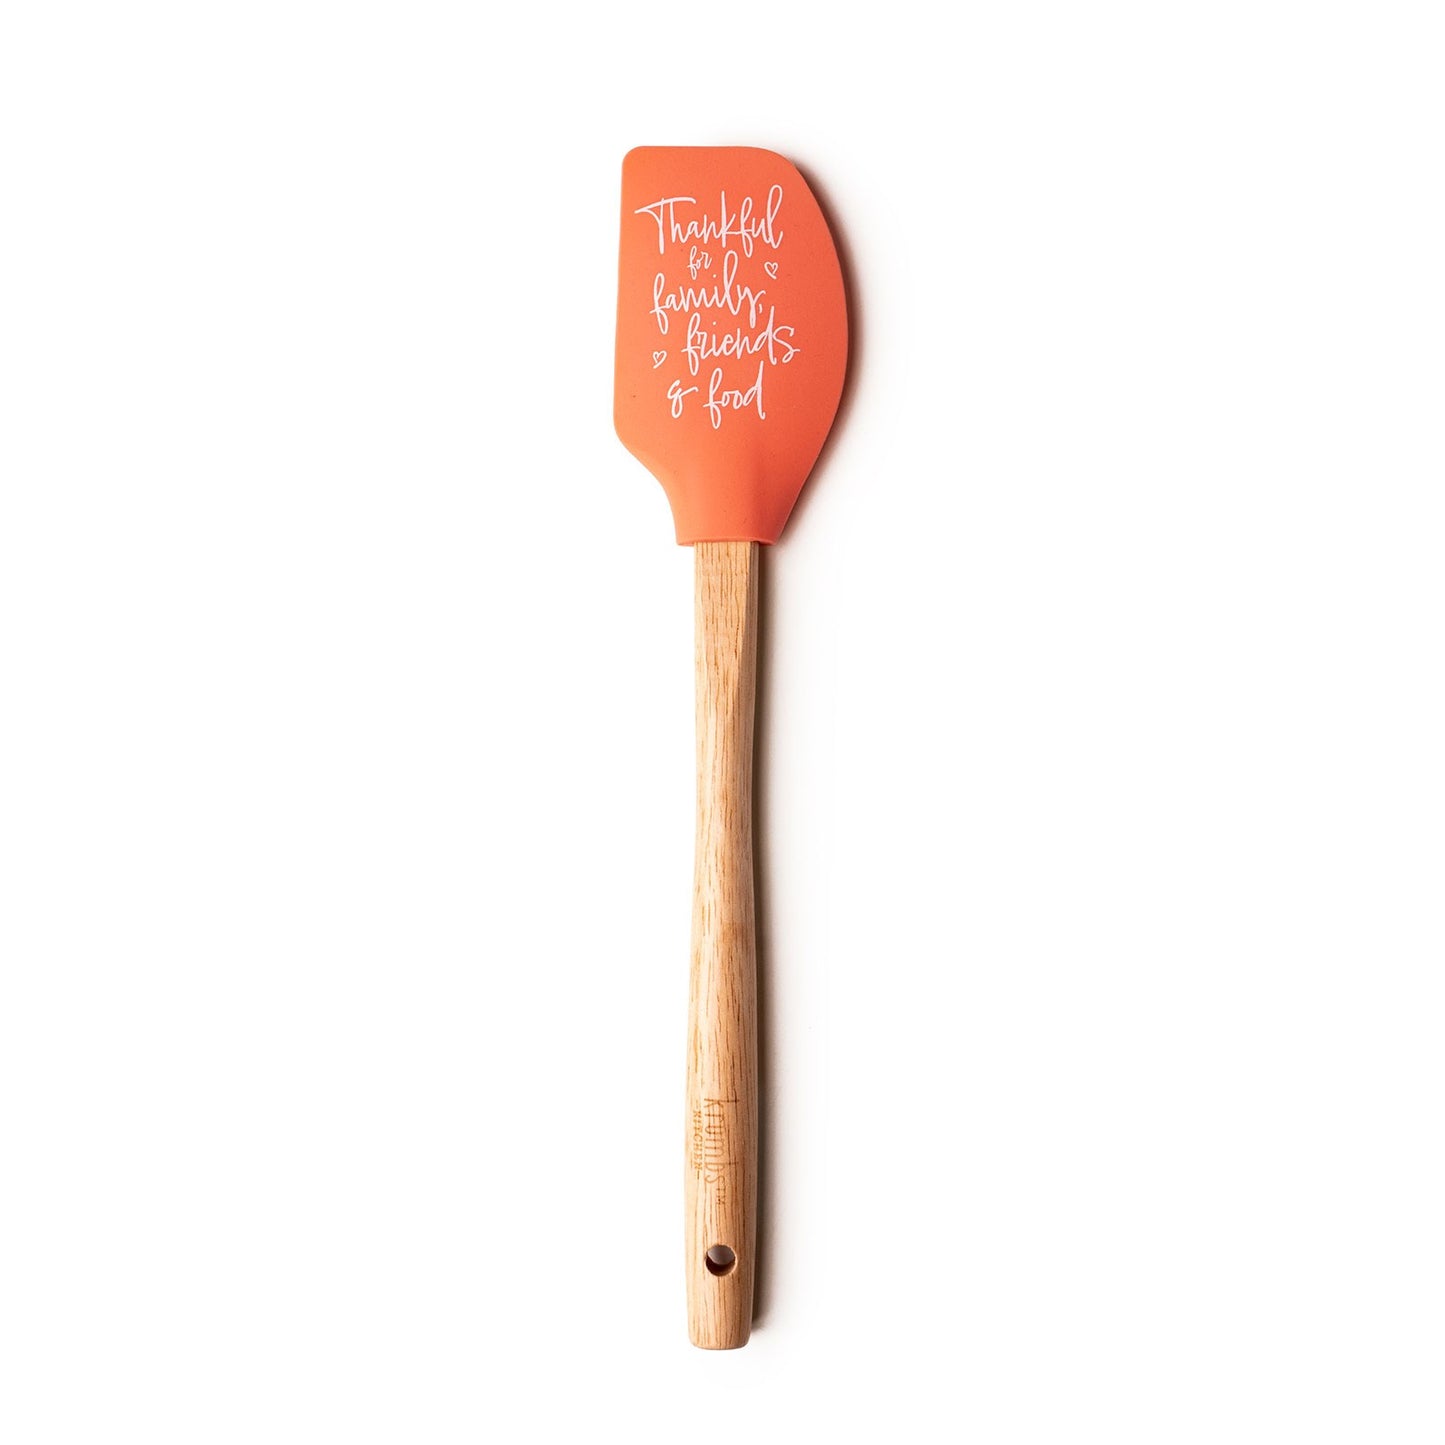 orange spatula with "thankful for family, friends, and food" printed on it and a wooden handle.